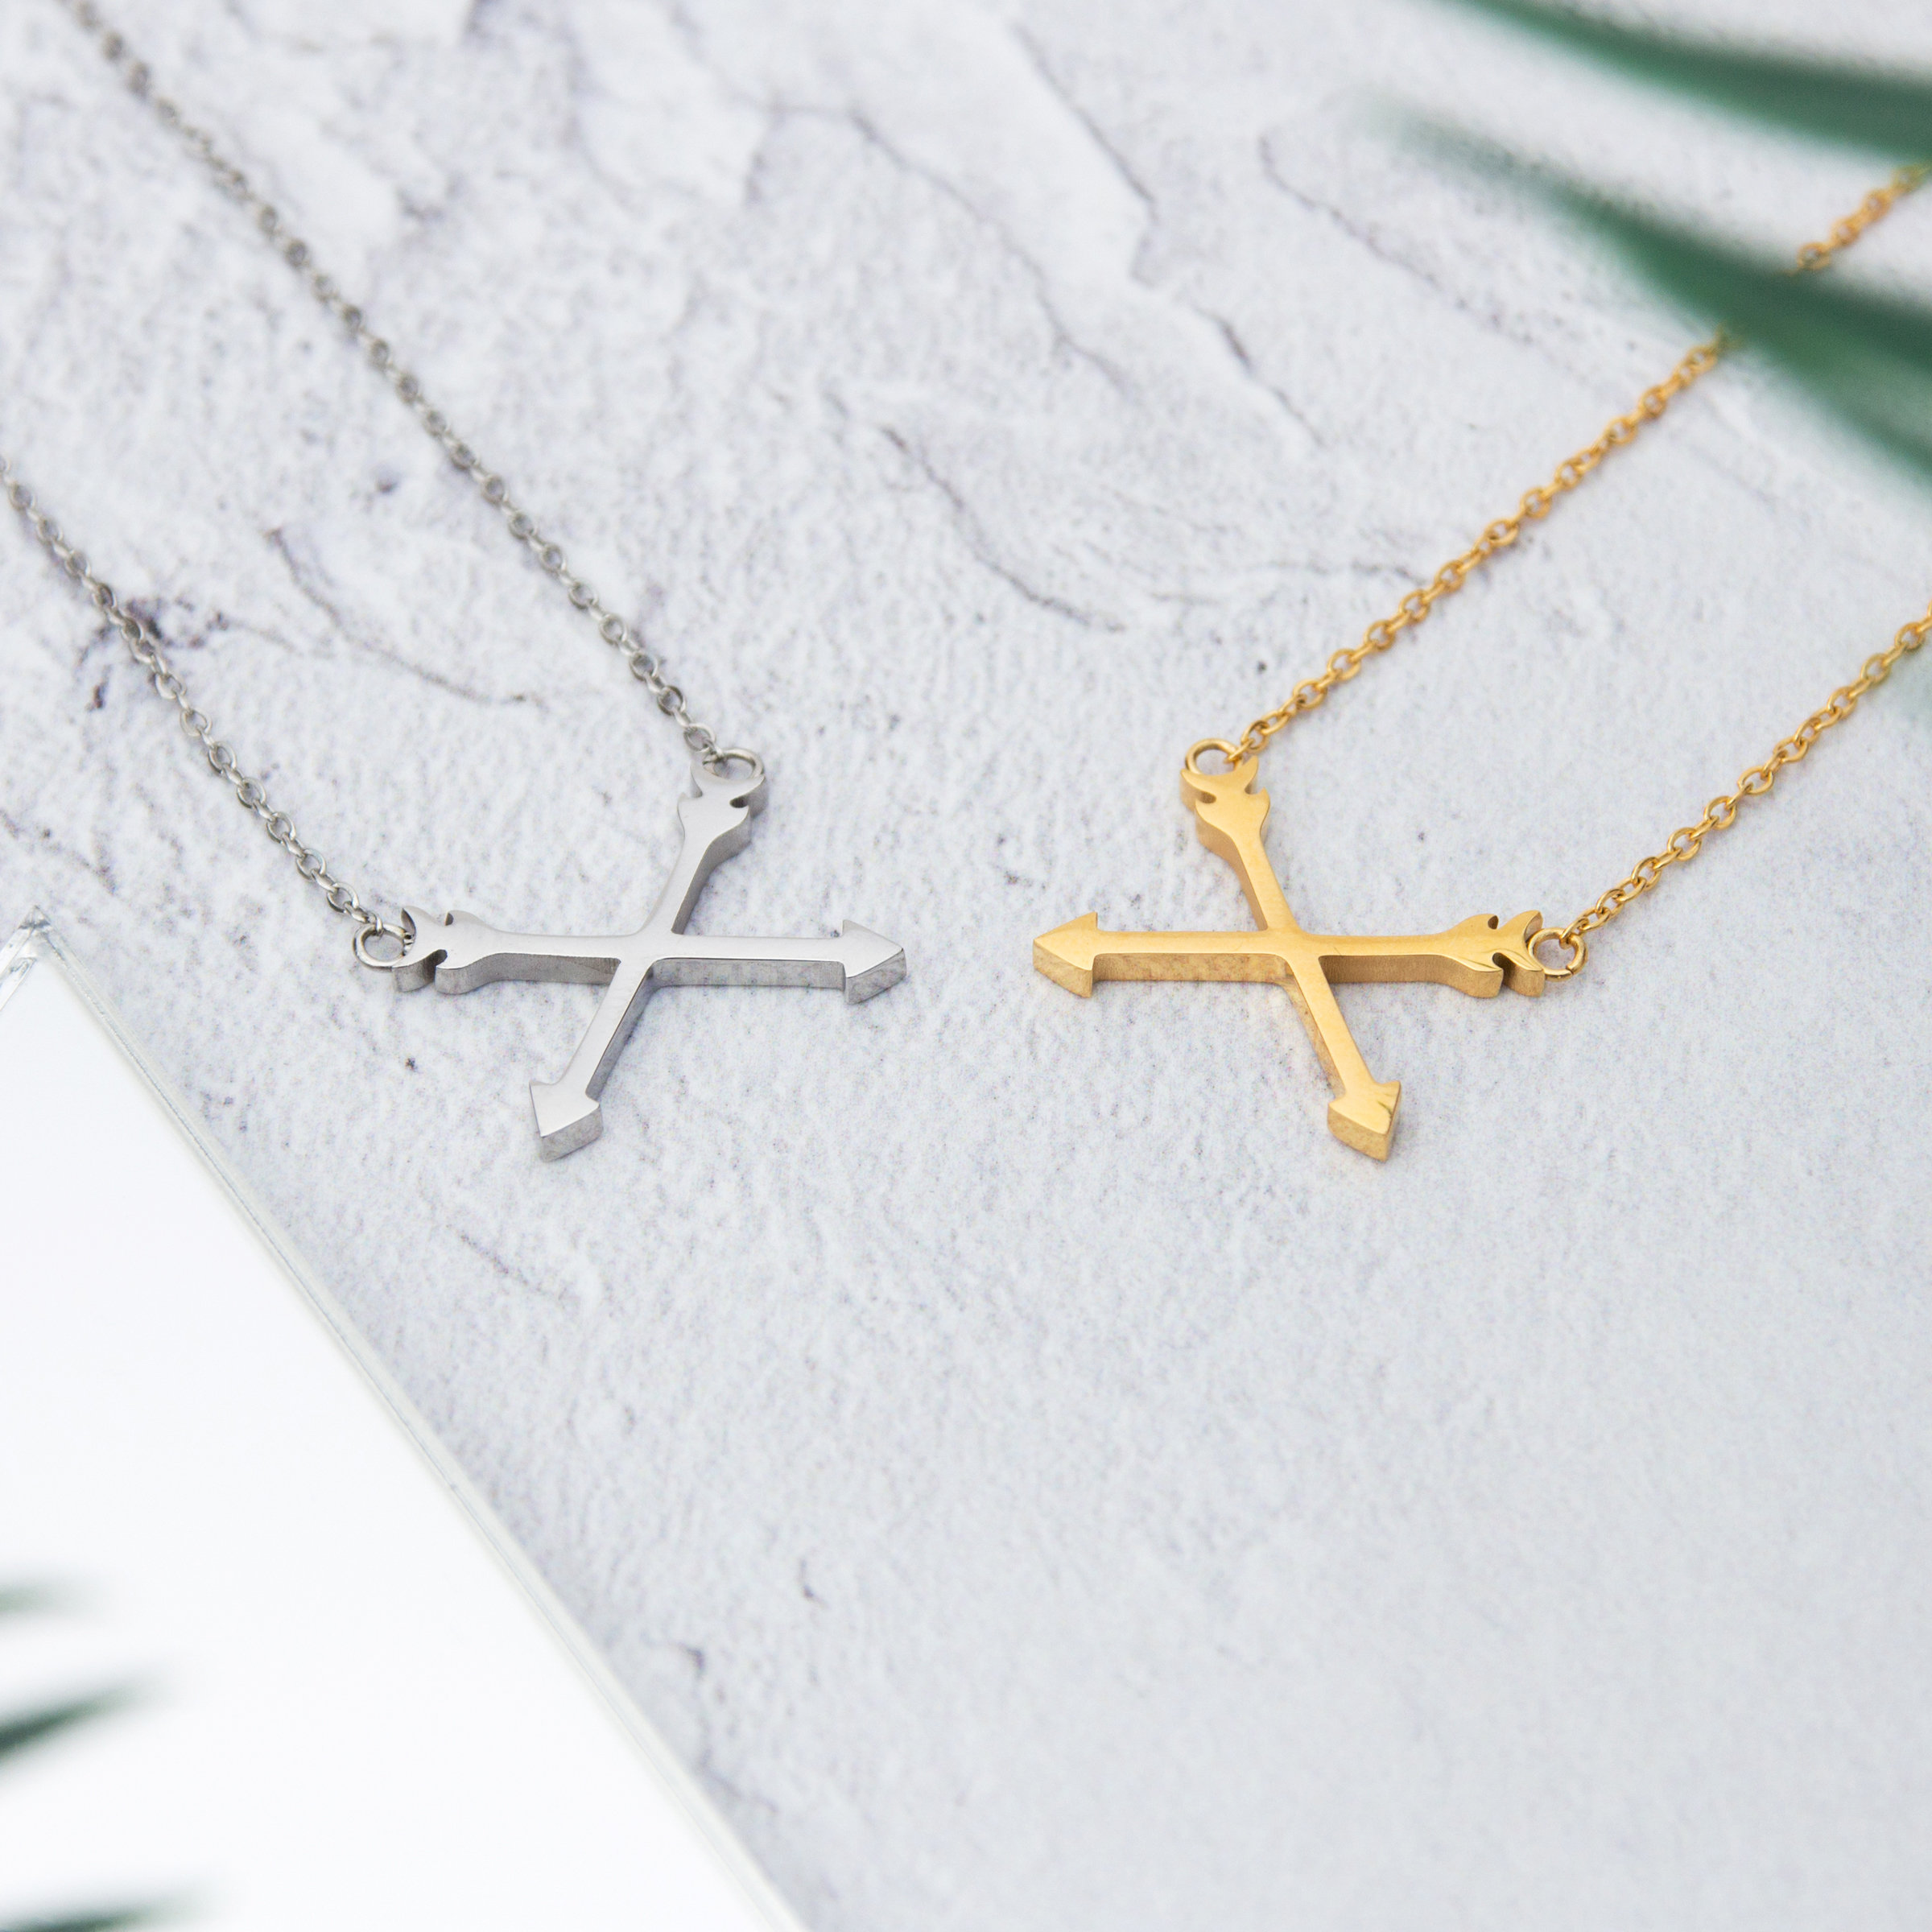 Kuku gold and silver arrow necklace